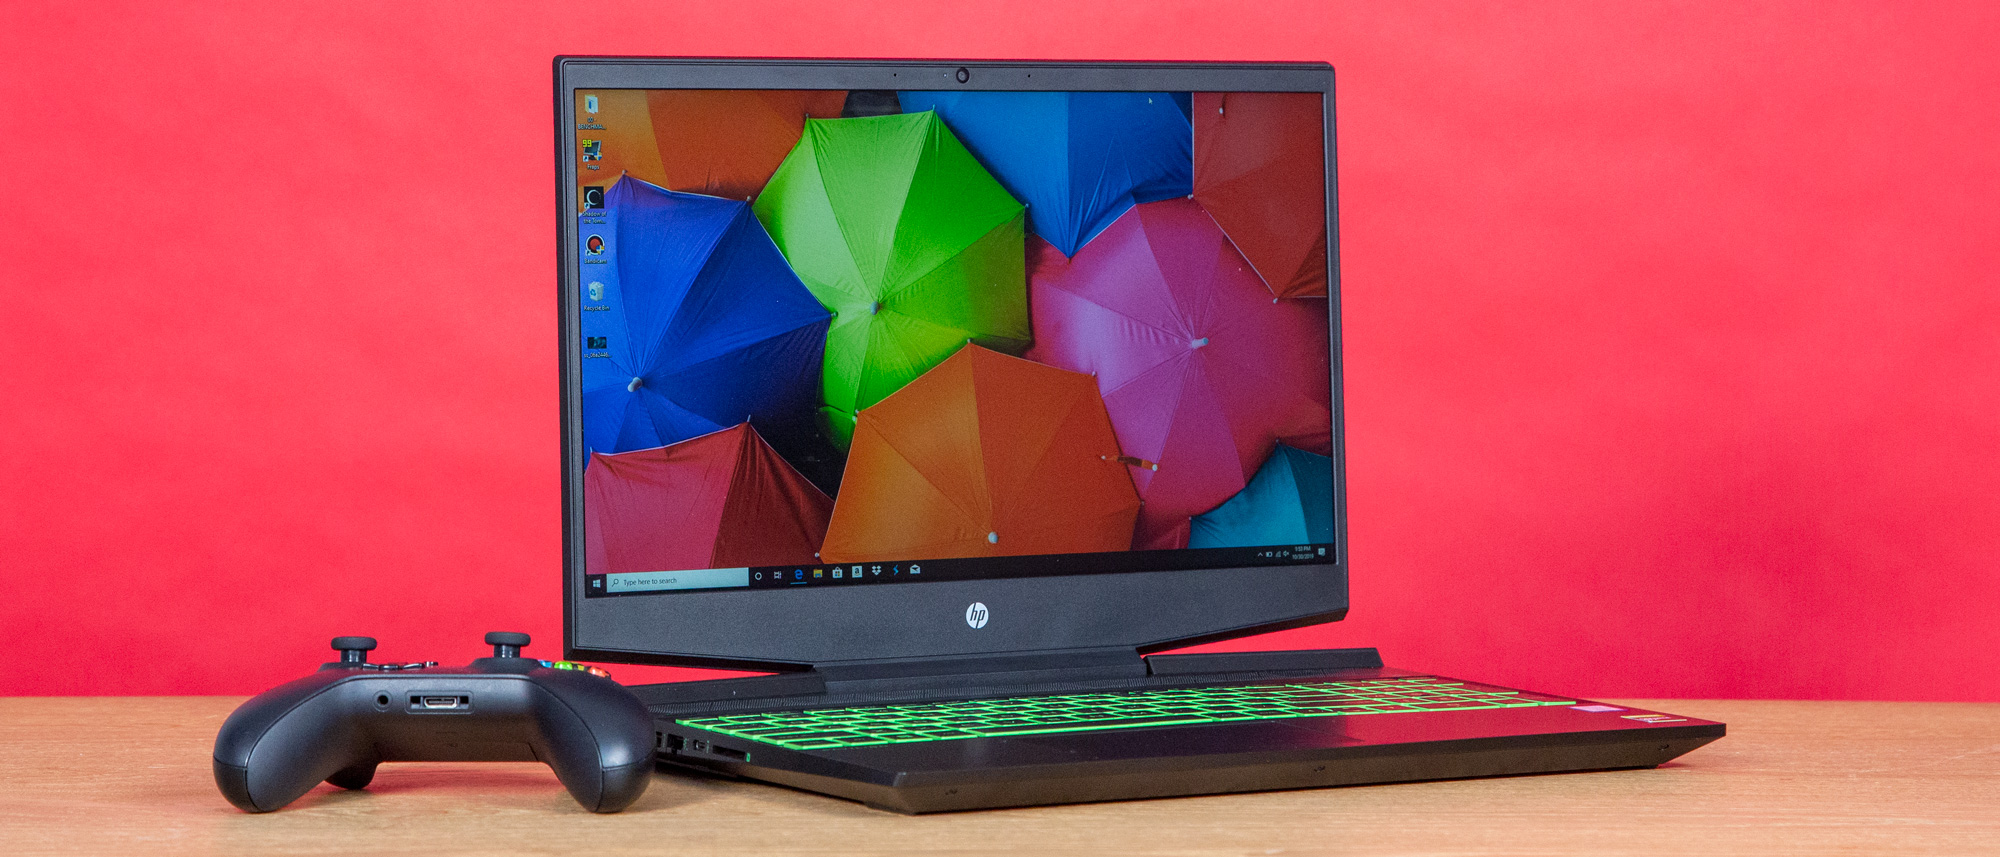 HP debuts Pavilion Gaming Laptops with many choices for mainstream